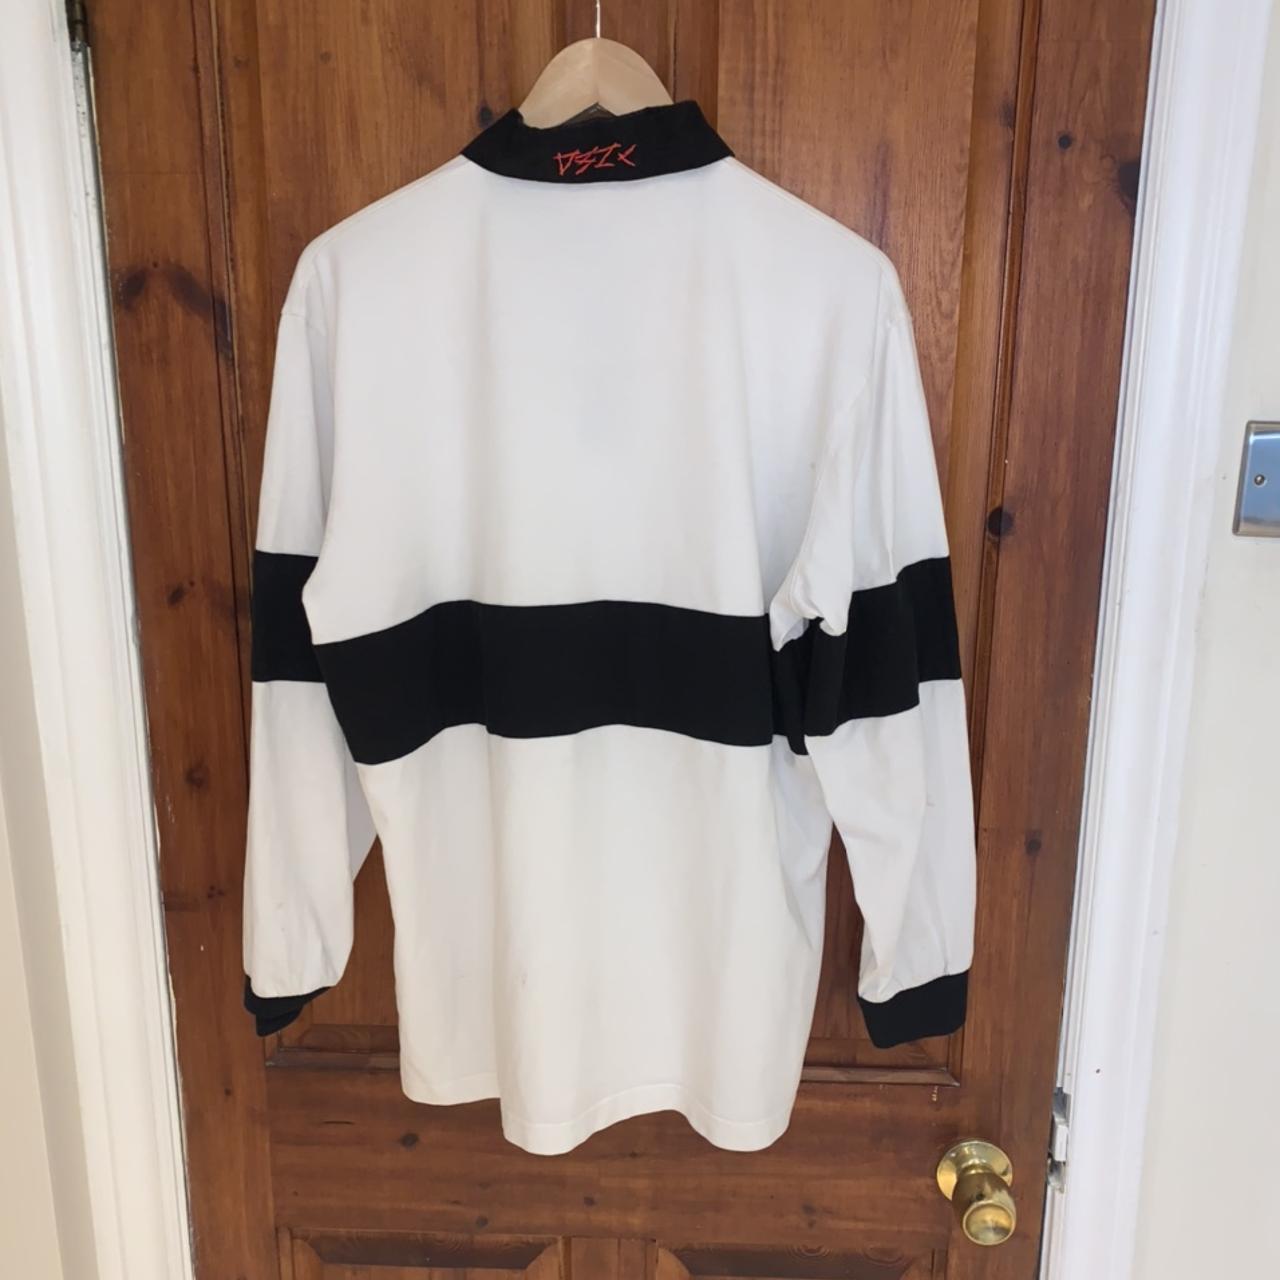 032c “Workshop” Rugby Top Size Large (would fit a... - Depop